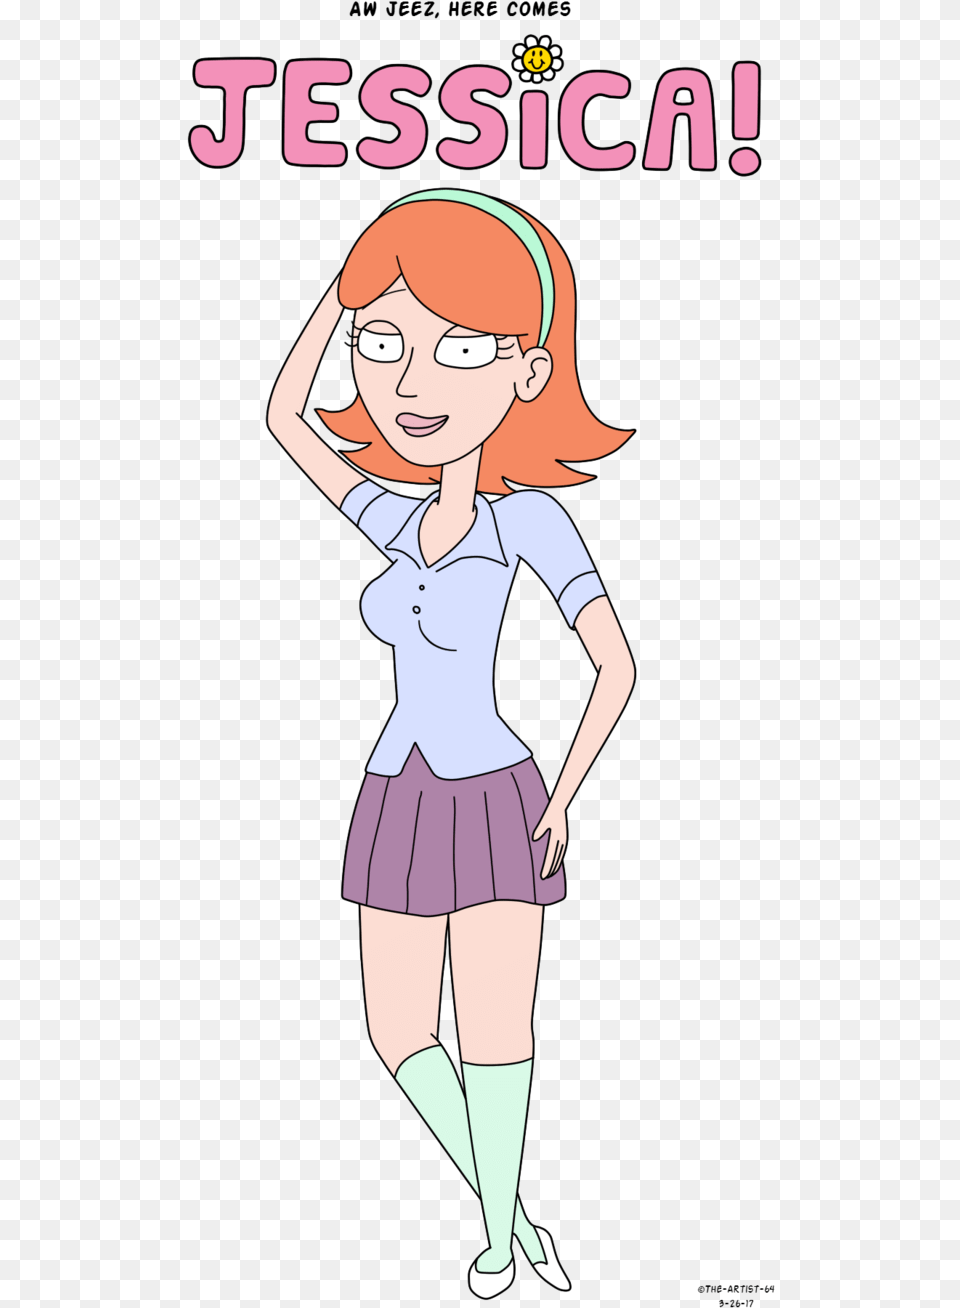 The Episode Jessica De Rick Y Morty, Book, Clothing, Comics, Skirt Free Png